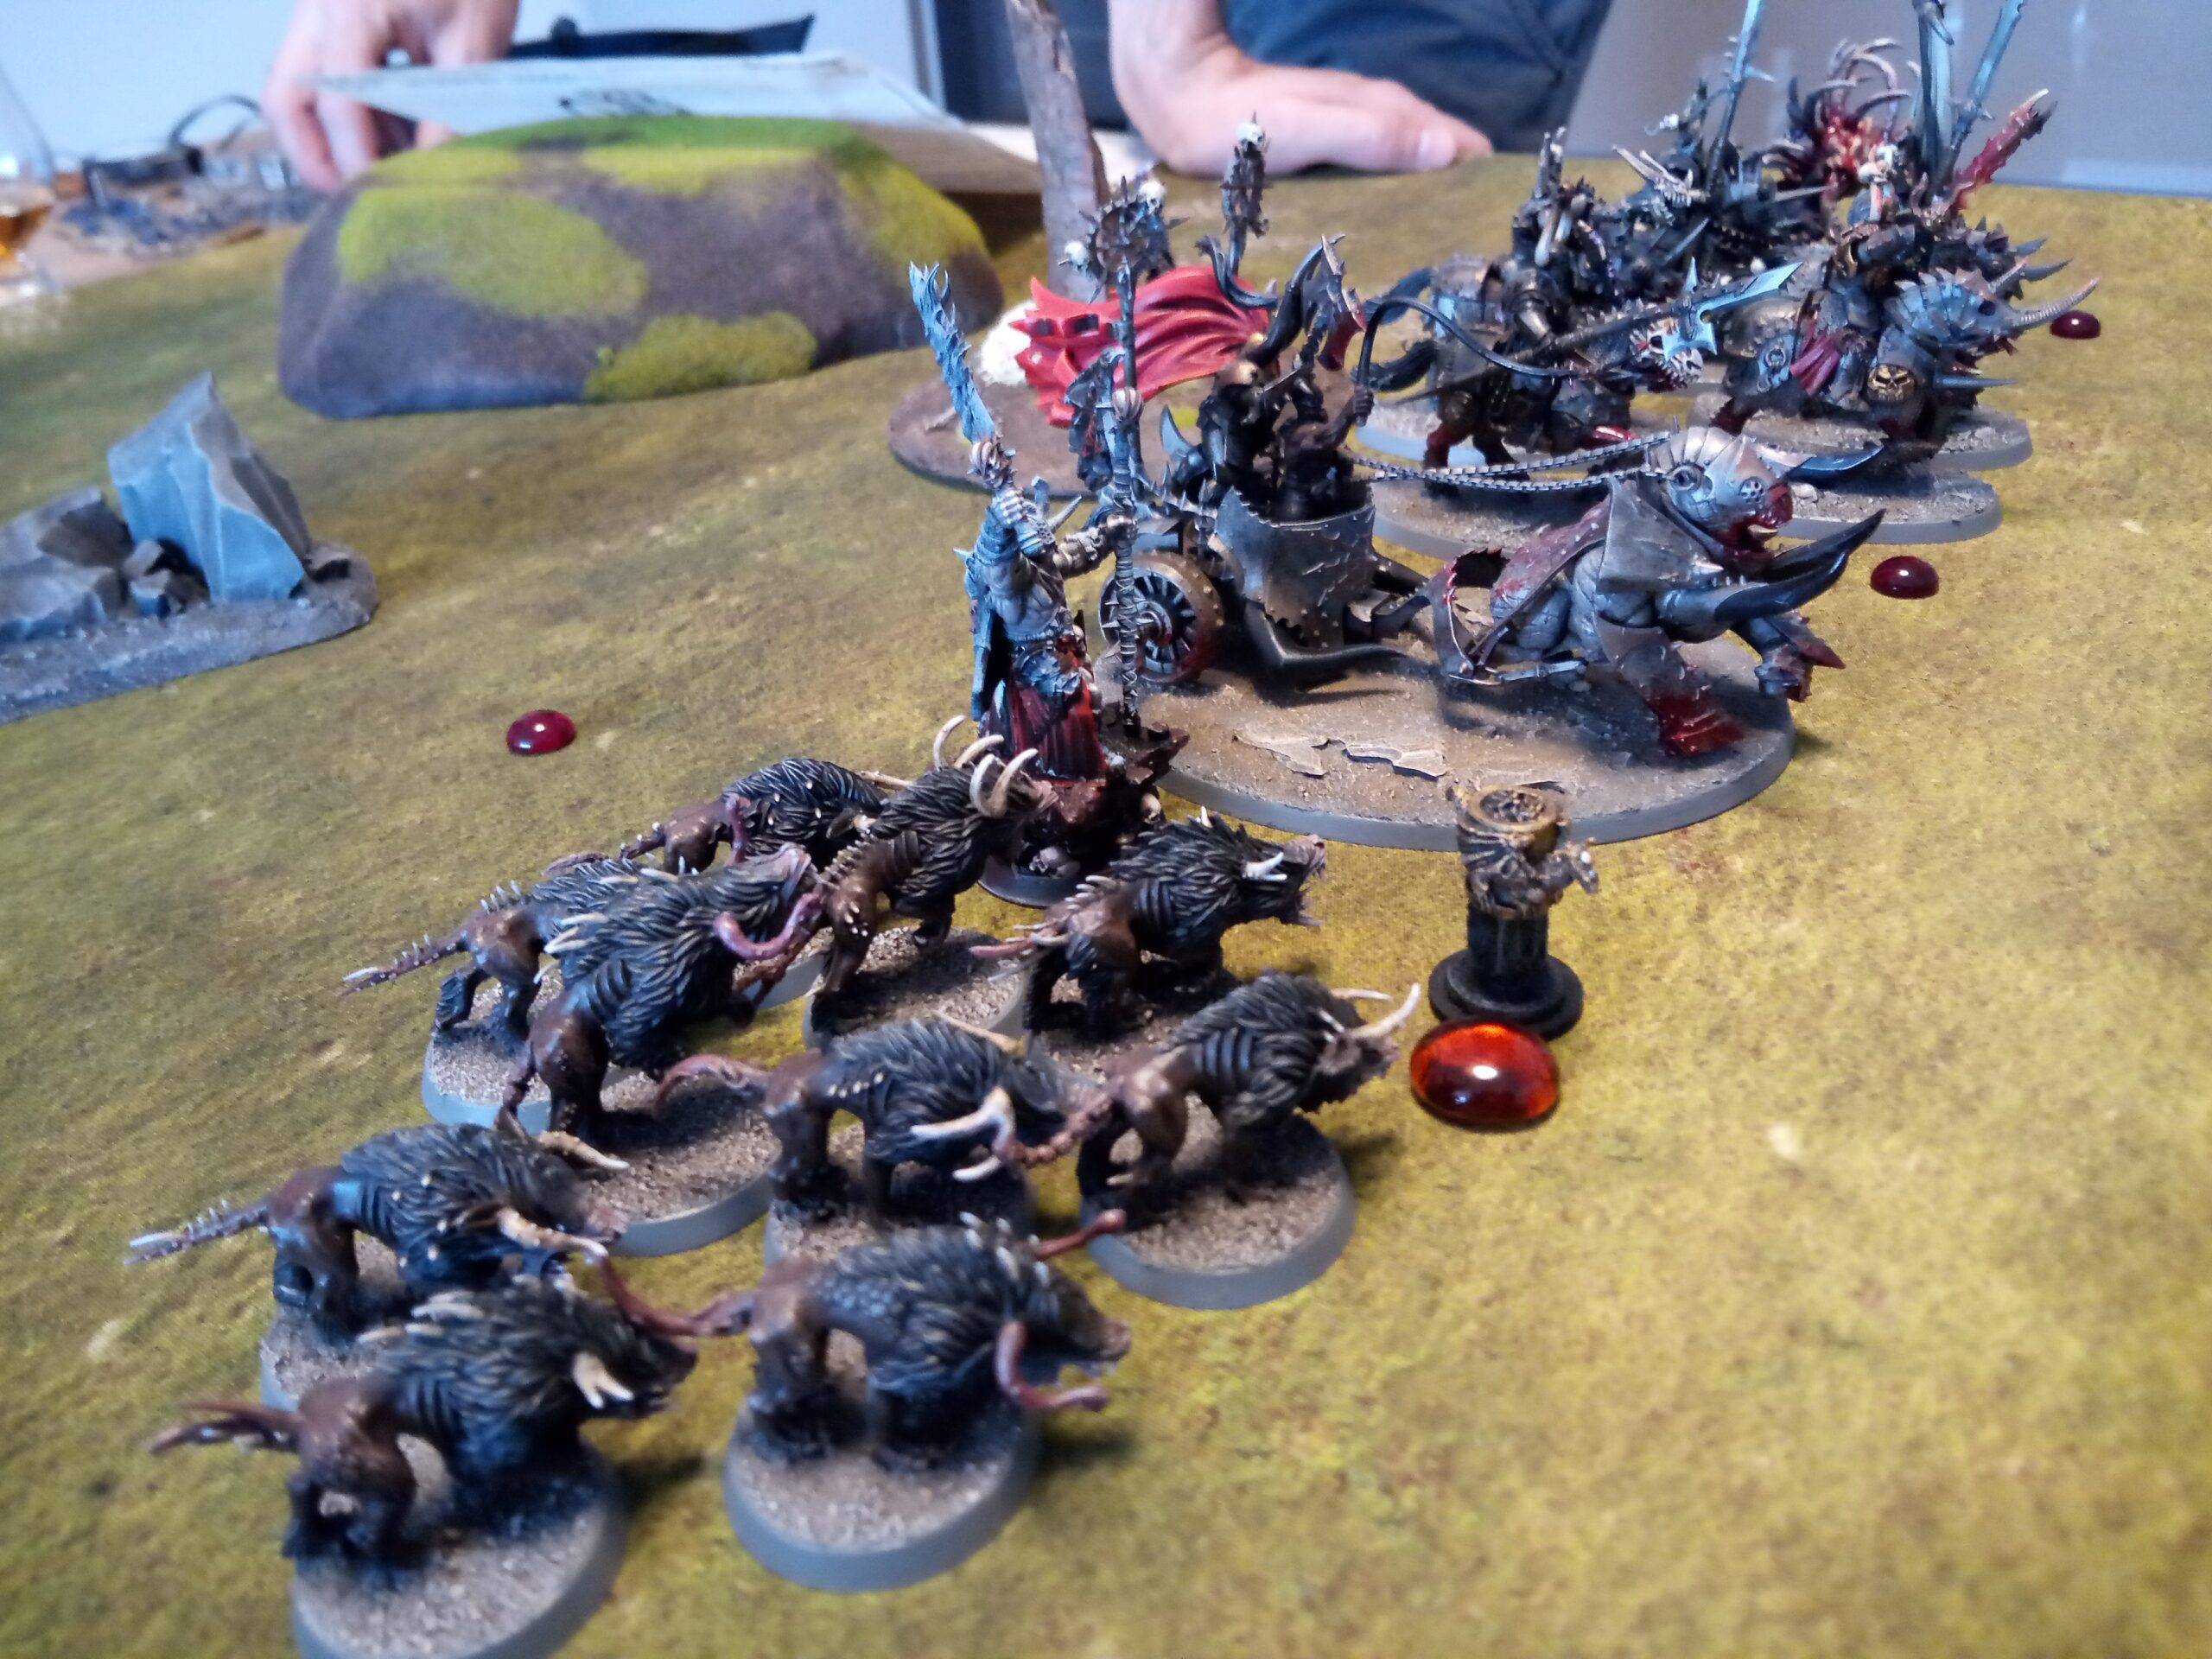 Havoc Warriors charging into battle in a game of One Page Rules Age of Fantasy.